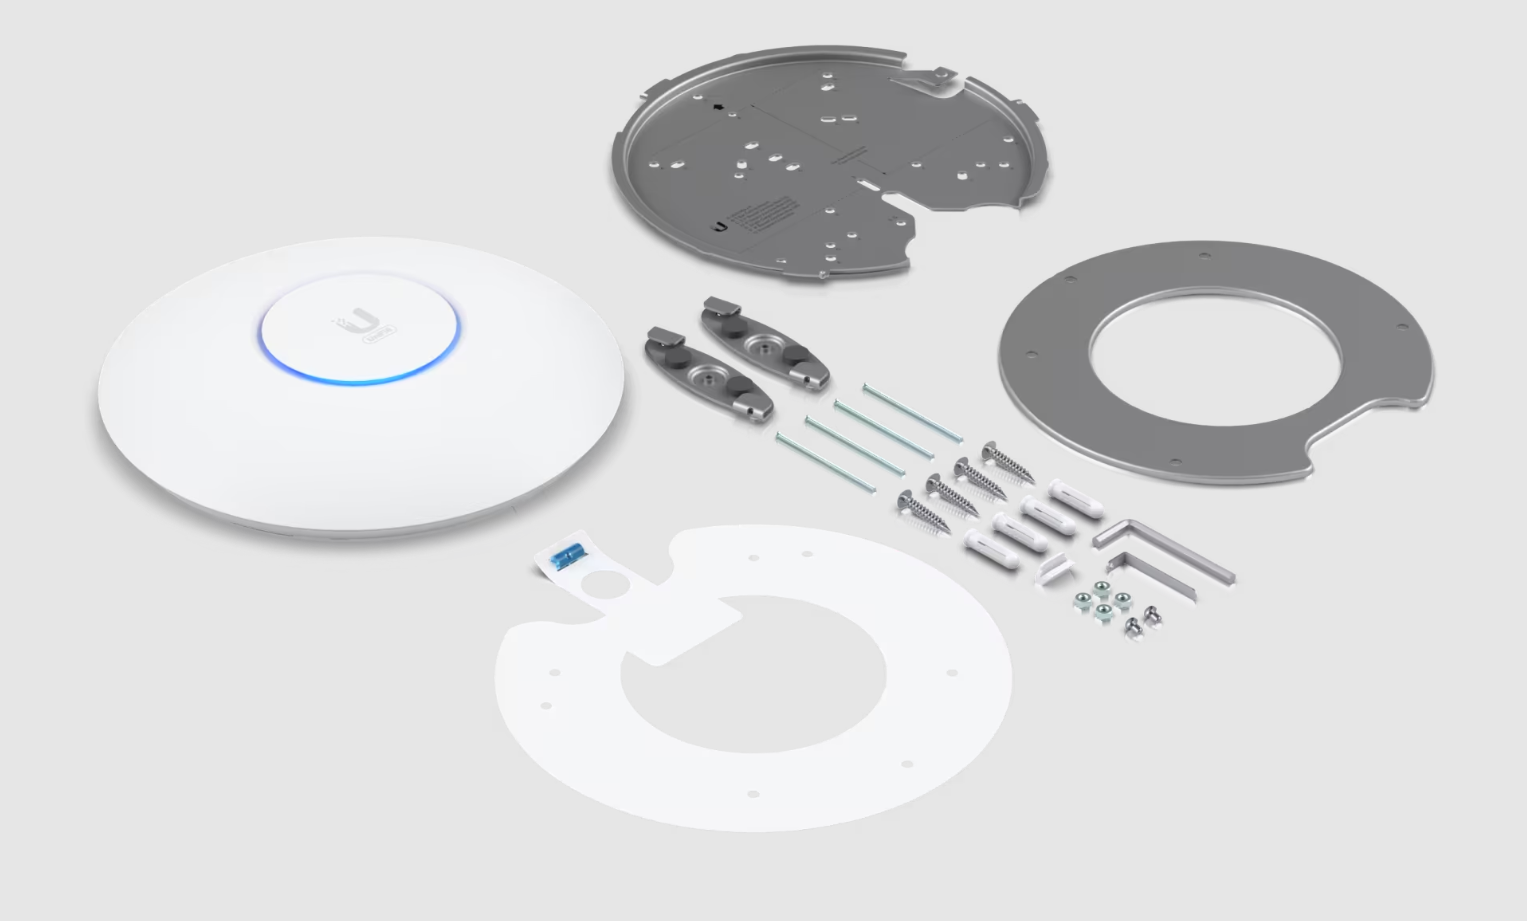 All that parts of the UniFi 6 Pro Access Point.